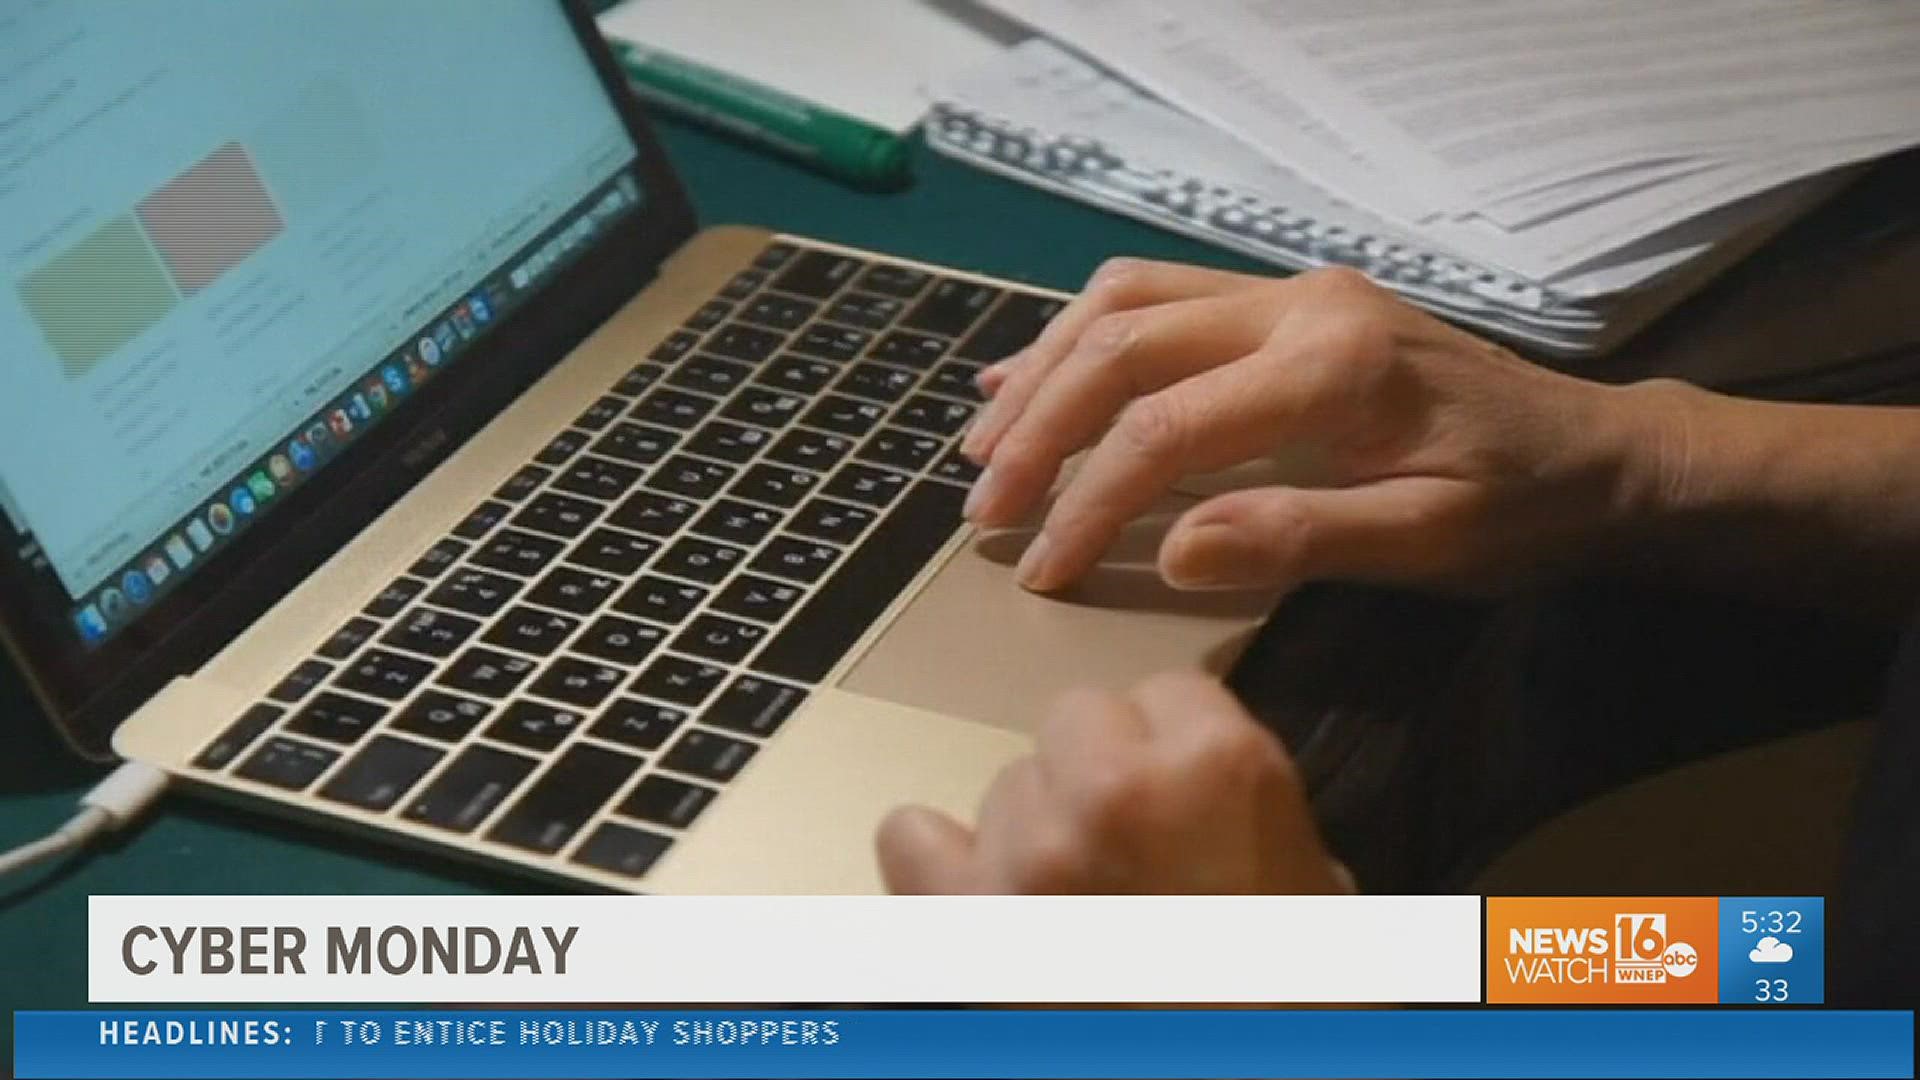 Cyber Monday is expected to drive in around $11.3 billion in online sales. Here are some tips to snag the best deals and keep you from overspending.